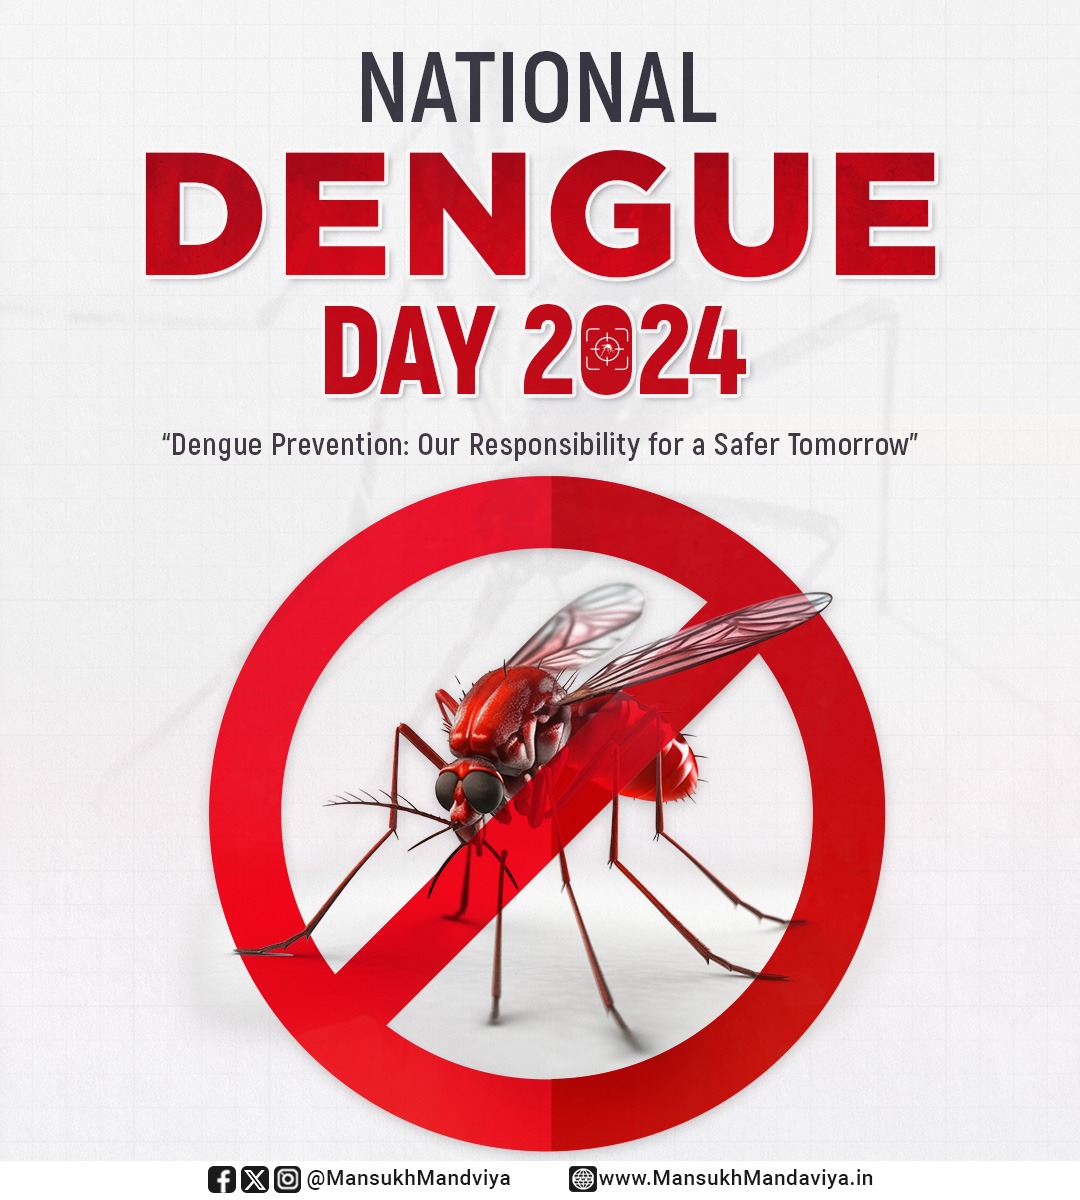 Fight the bite, beat dengue right! 🦟 ❌ With awareness and action, we can prevent the spread of dengue. On #NationalDengueDay, let us pledge to work towards keeping our surroundings clean and safeguarding our communities from this mosquito-borne disease.